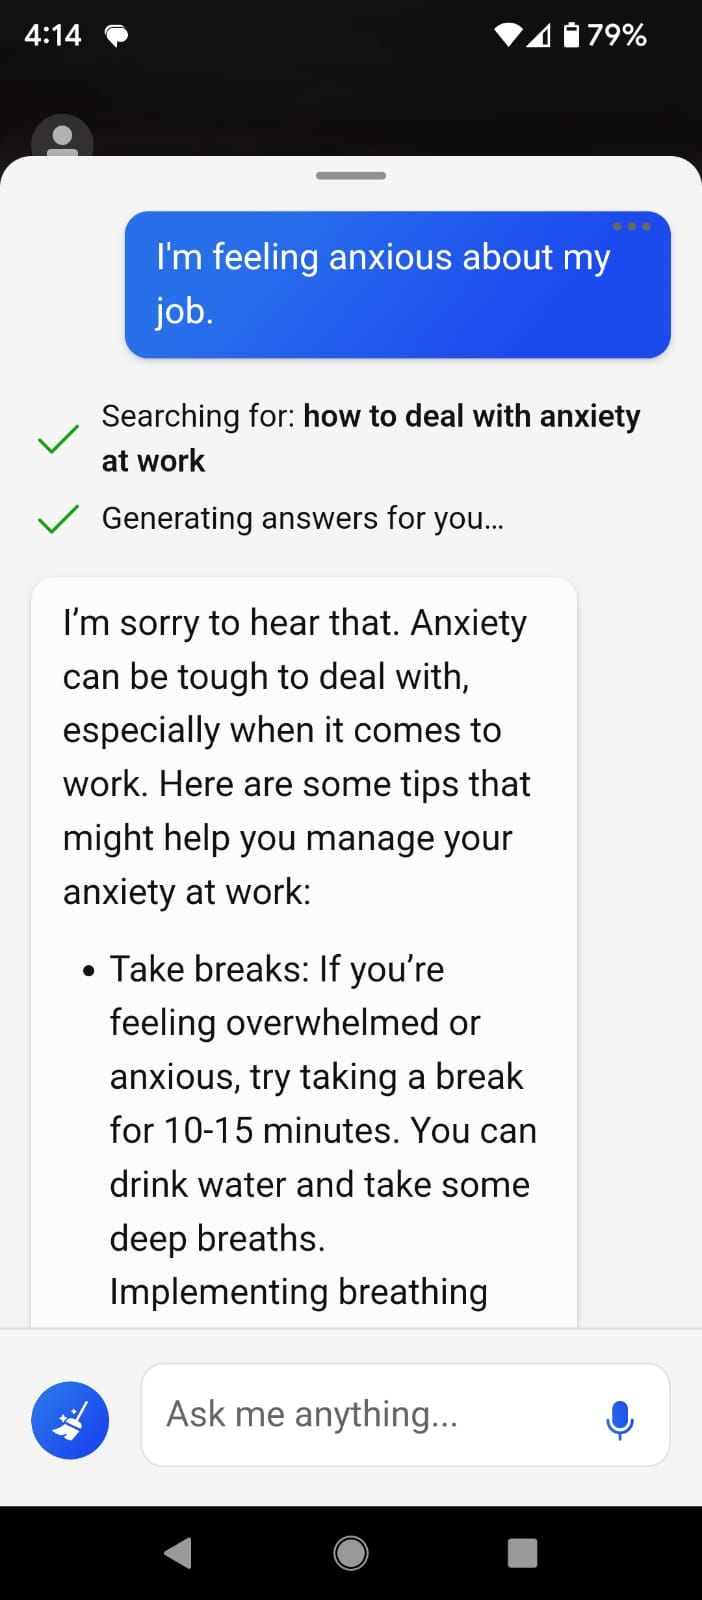 Talking about work anxiety with Bing